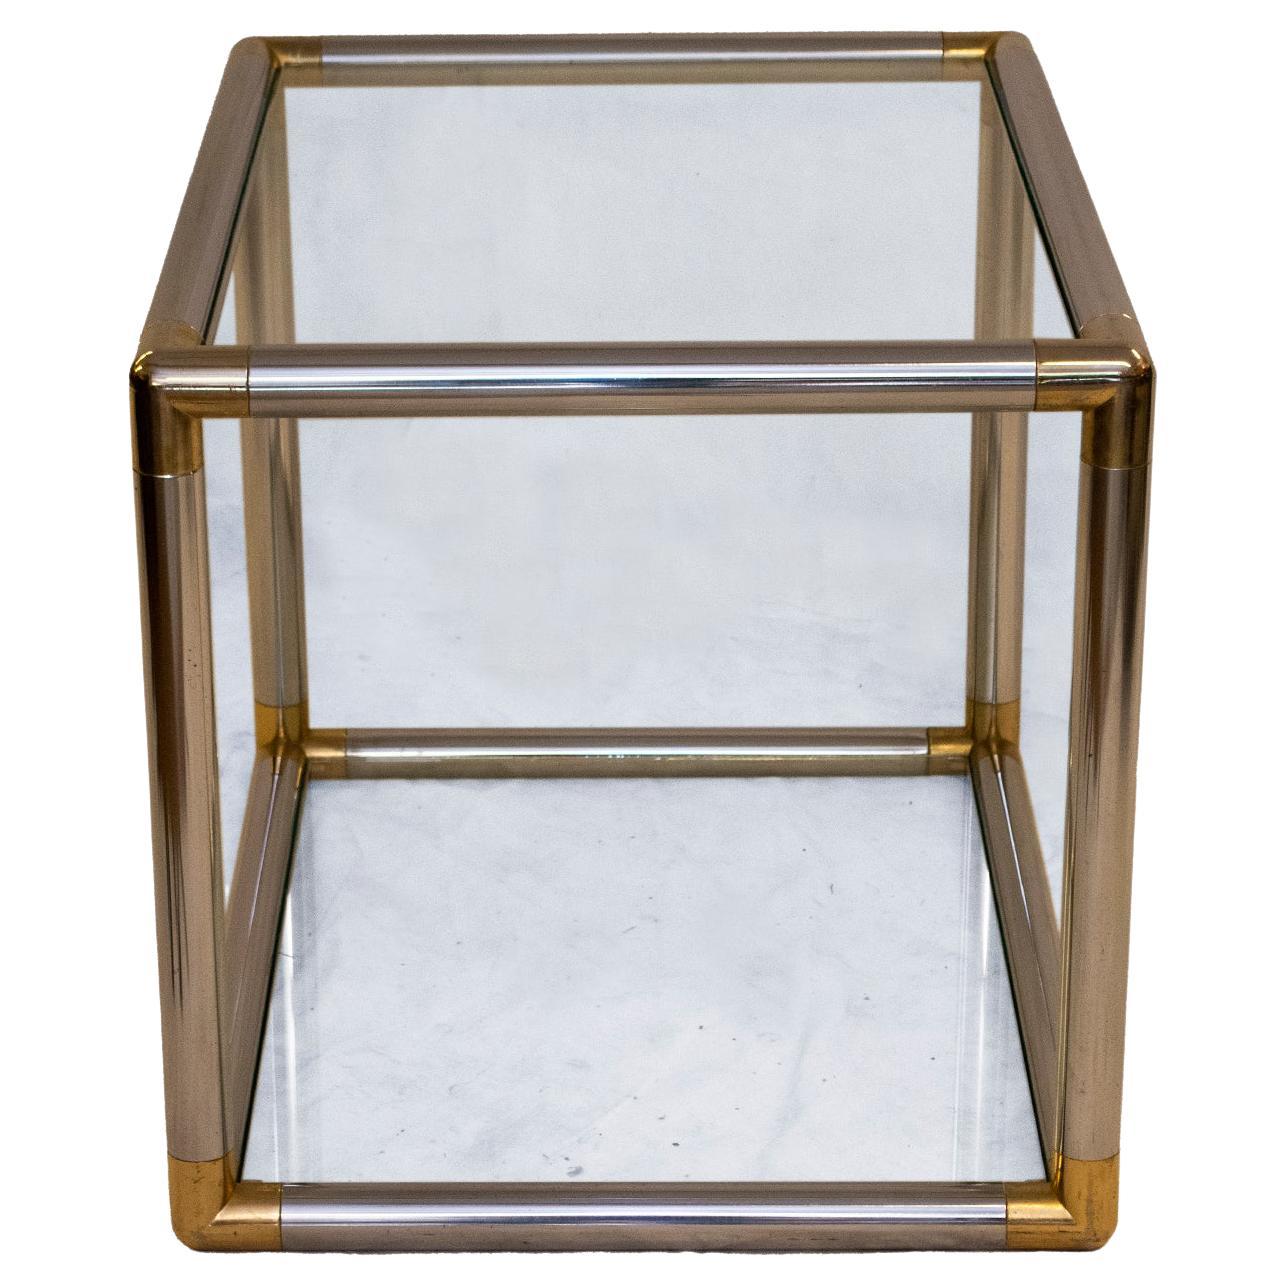 Unique End Table in the style of Karl Springer, renowned designer and manufacturer of luxury furniture. Polished chrome with brass details at curved corners. This end table is glamorous as well as practical with two glass inserts, top and bottom.